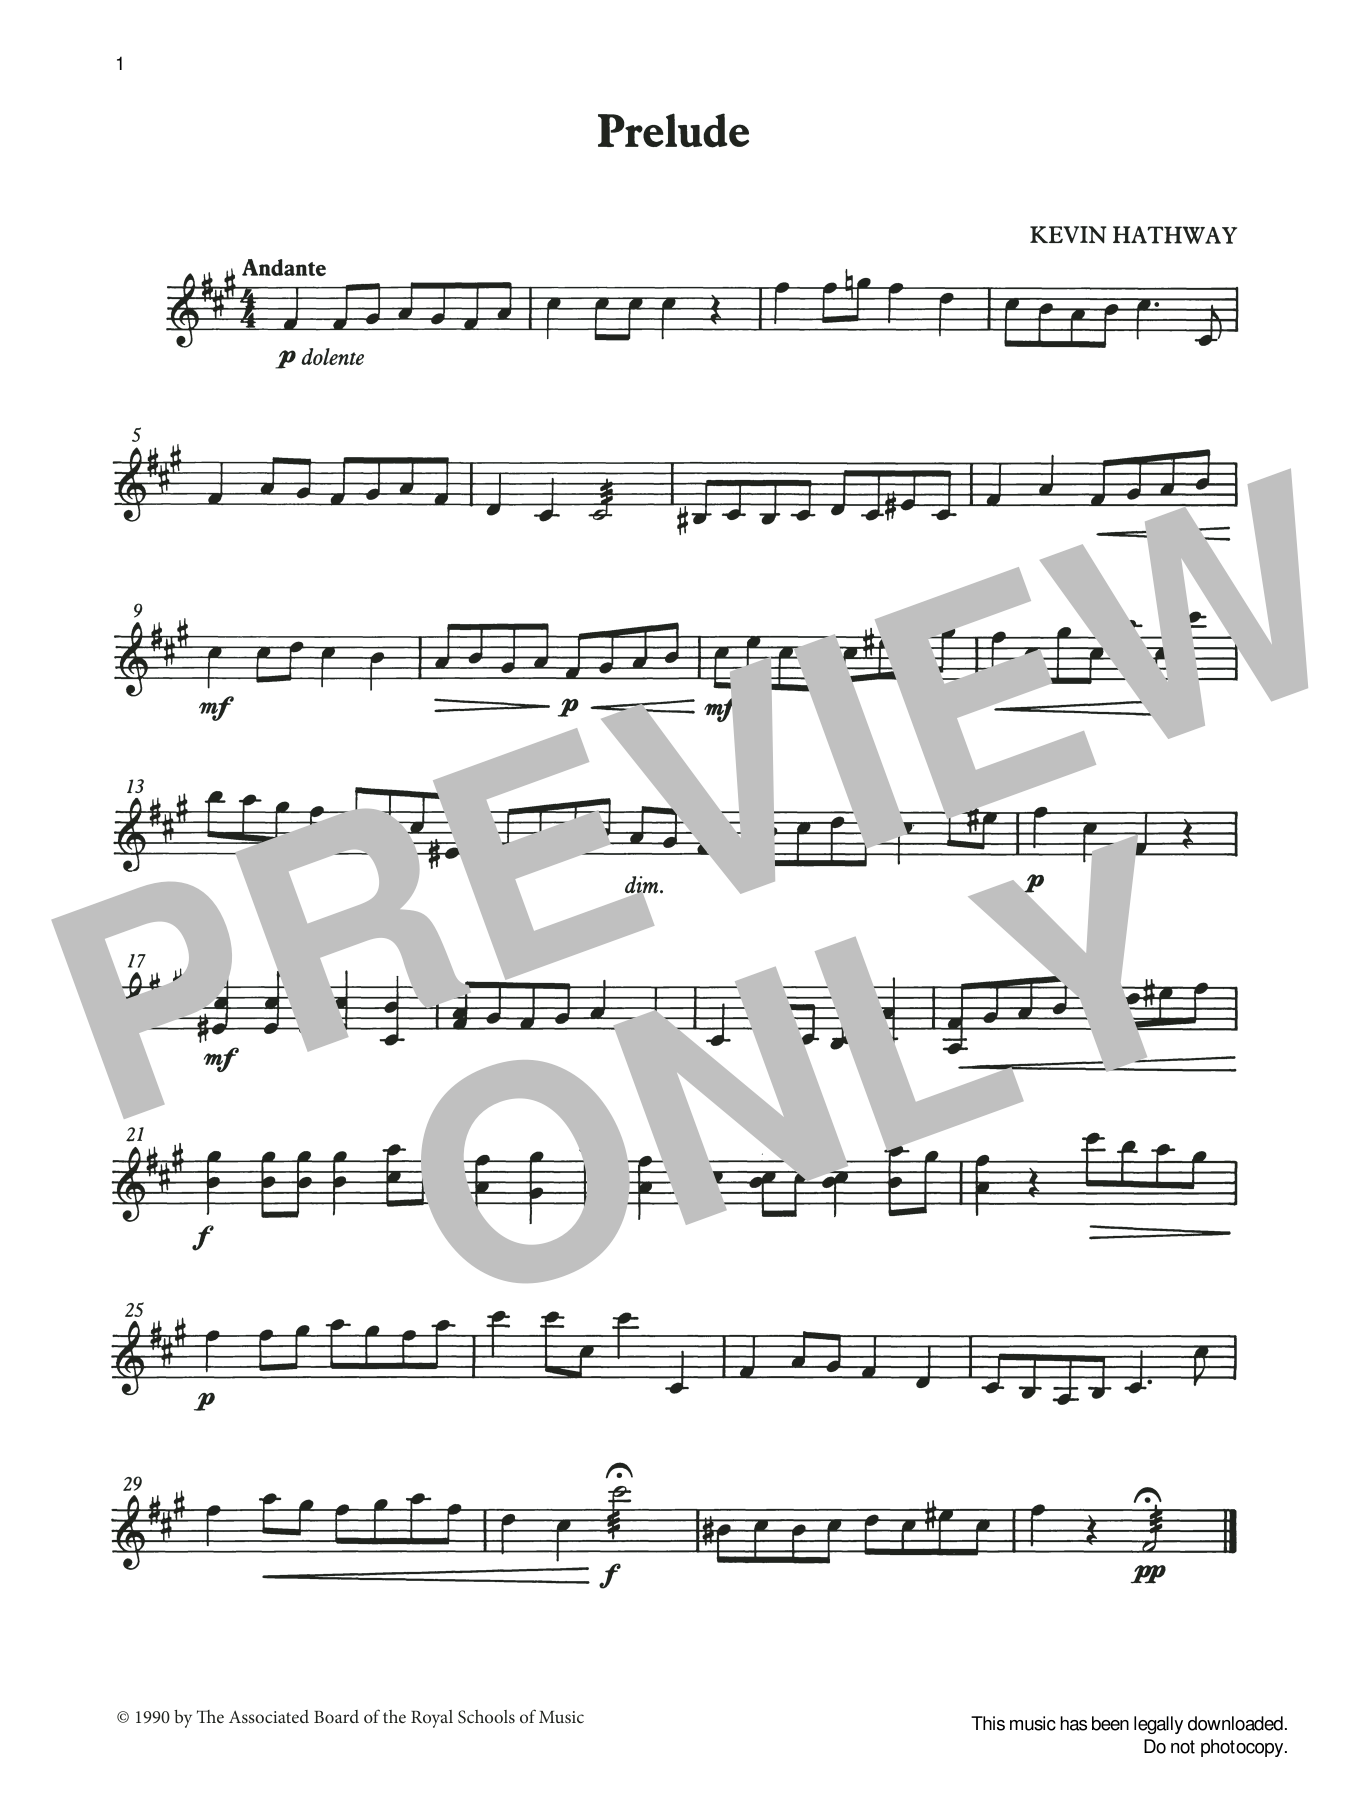 Prelude from Graded Music for Tuned Percussion, Book II (Percussion Solo) von Ian Wright and Kevin Hathaway